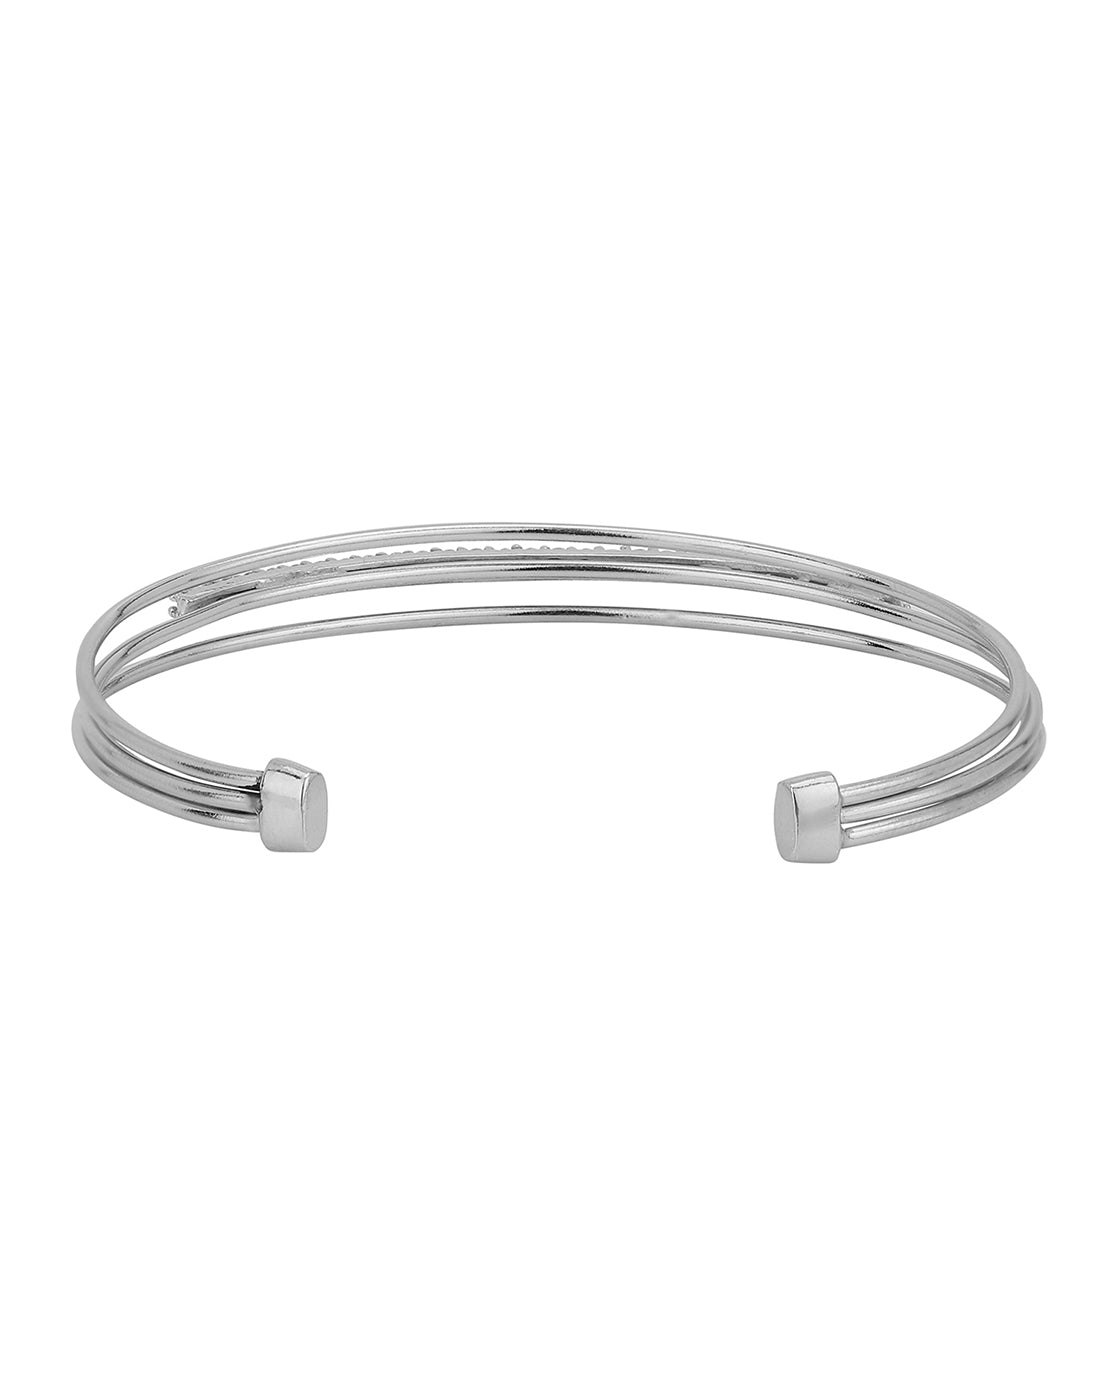 Silver Cuff Bangle for Ladies | Hersey & Son Silversmiths